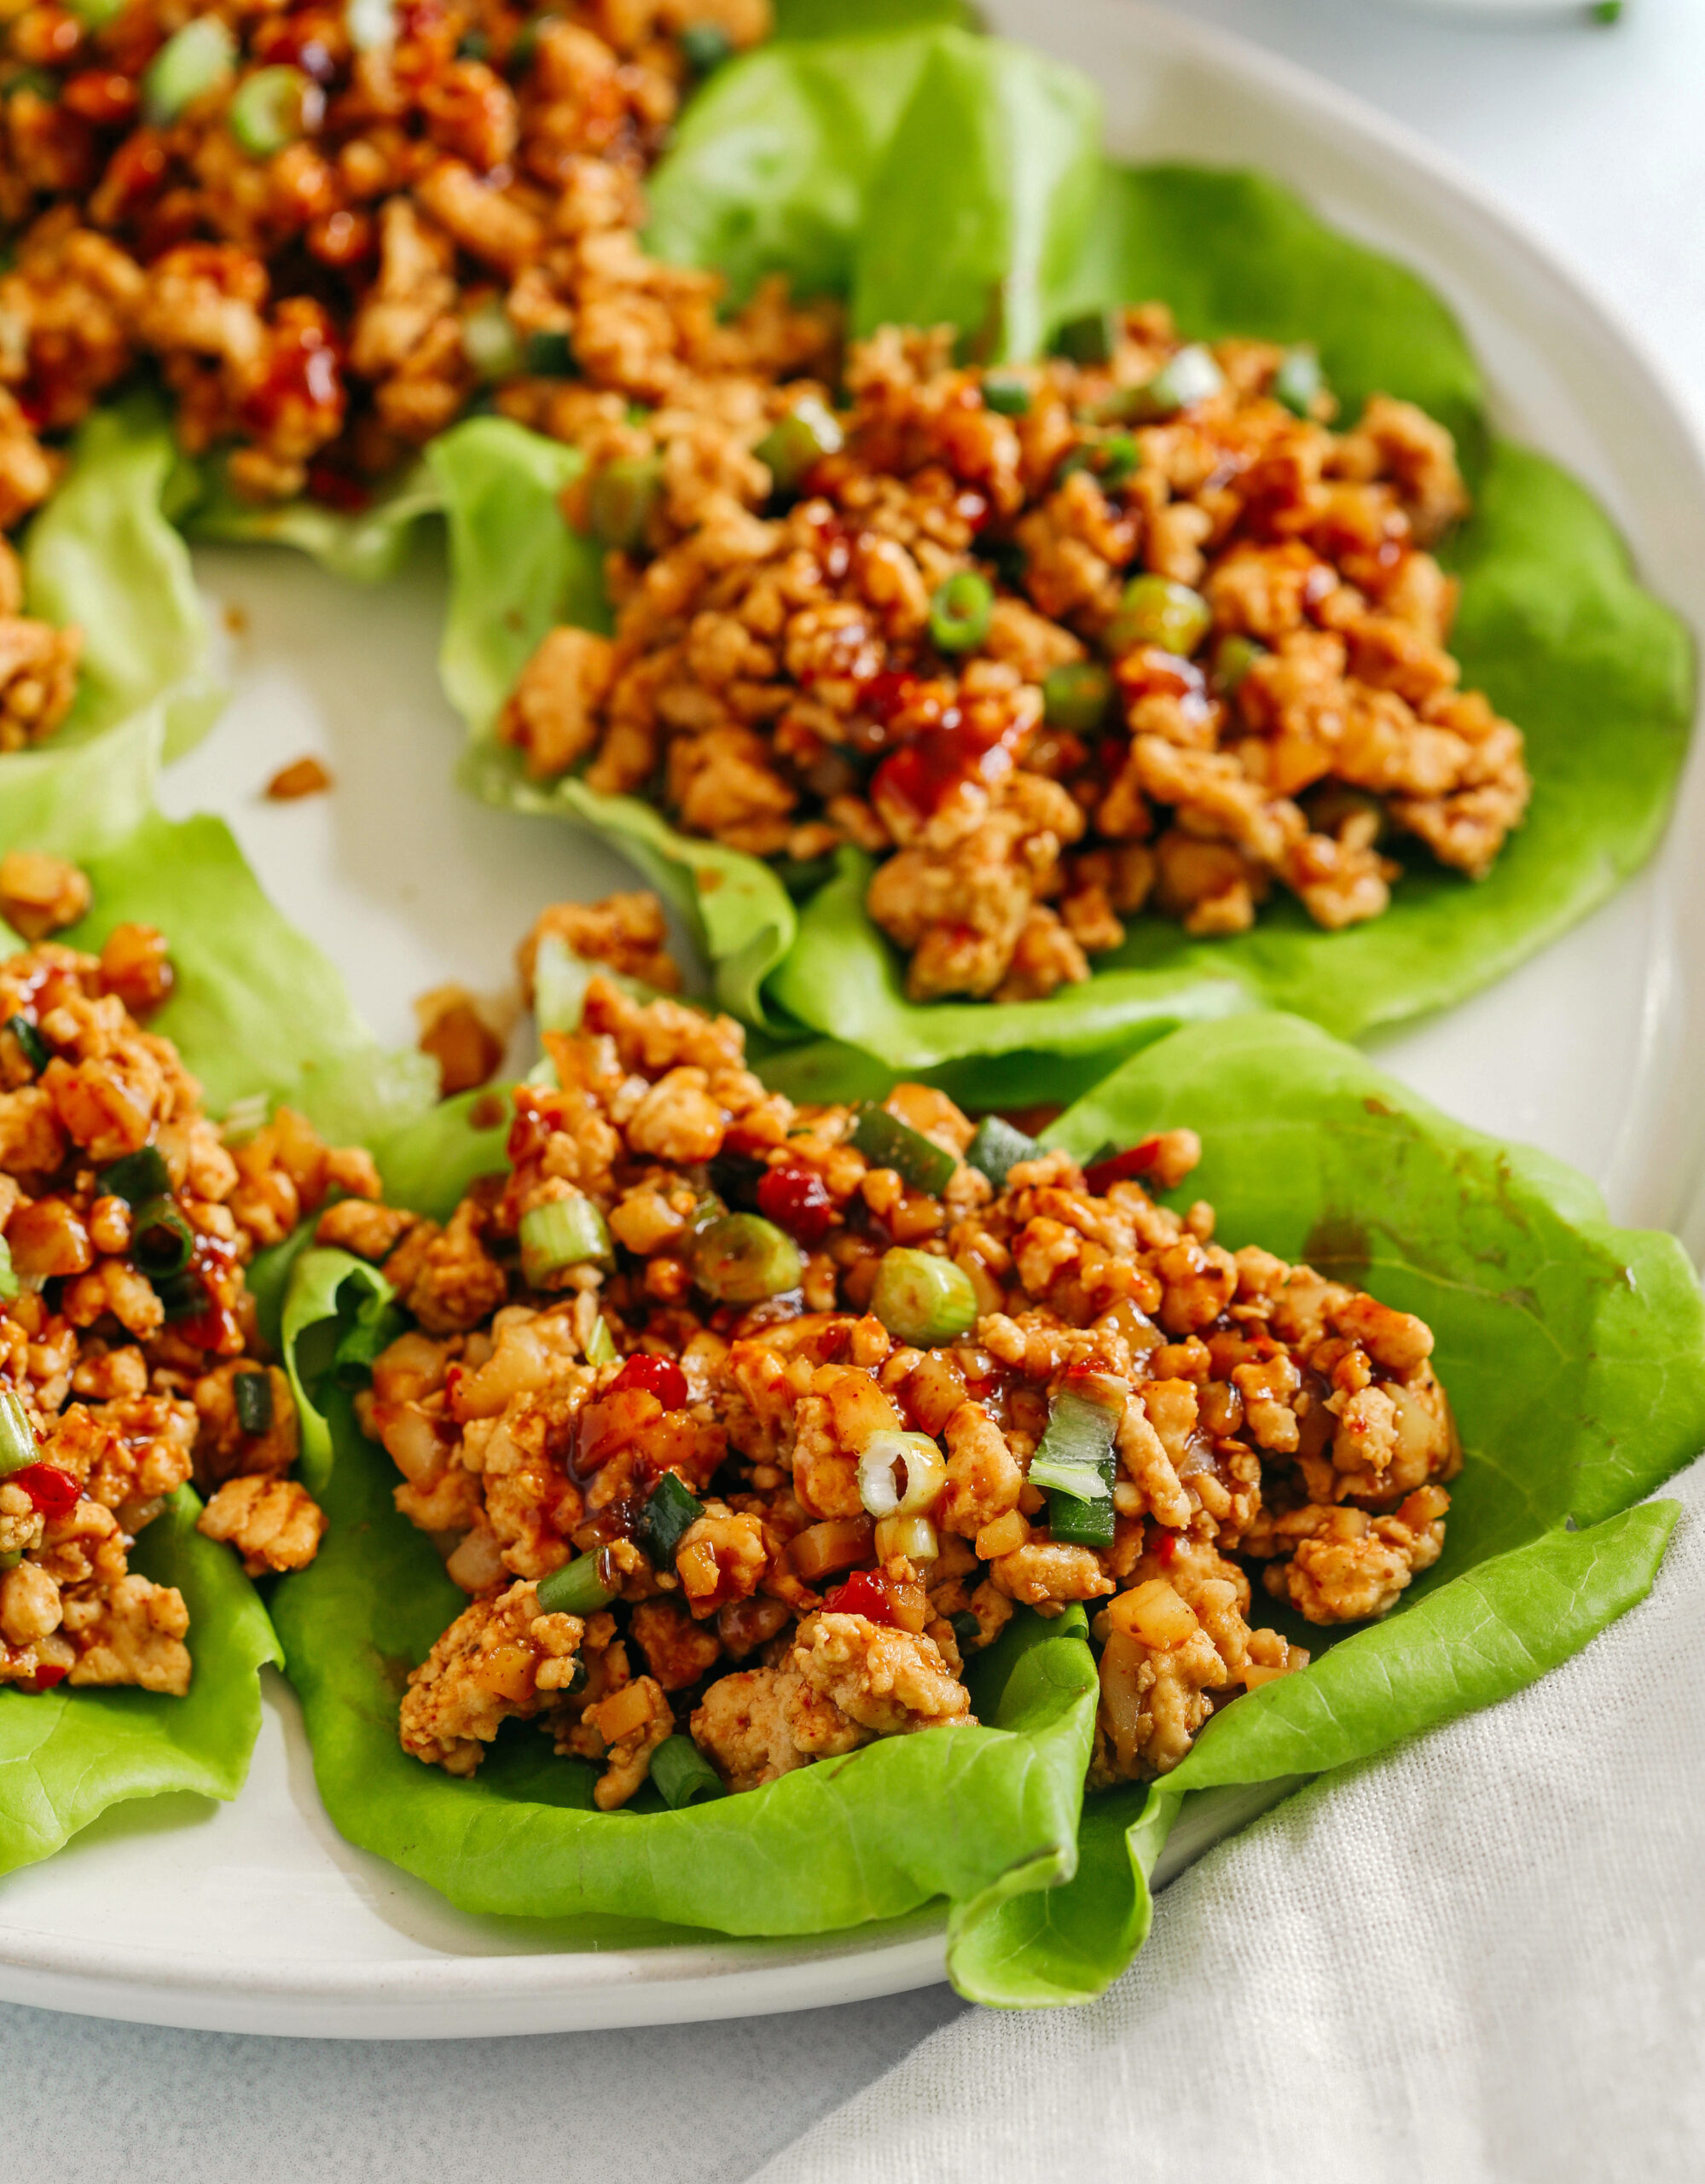 Inspired by PF Changs’ famous recipe, these Asian Turkey Lettuce Wraps are quick, easy to make and are full of so much flavor!  Perfect as an appetizer, side dish or even main course for a healthy meal the whole family will love!